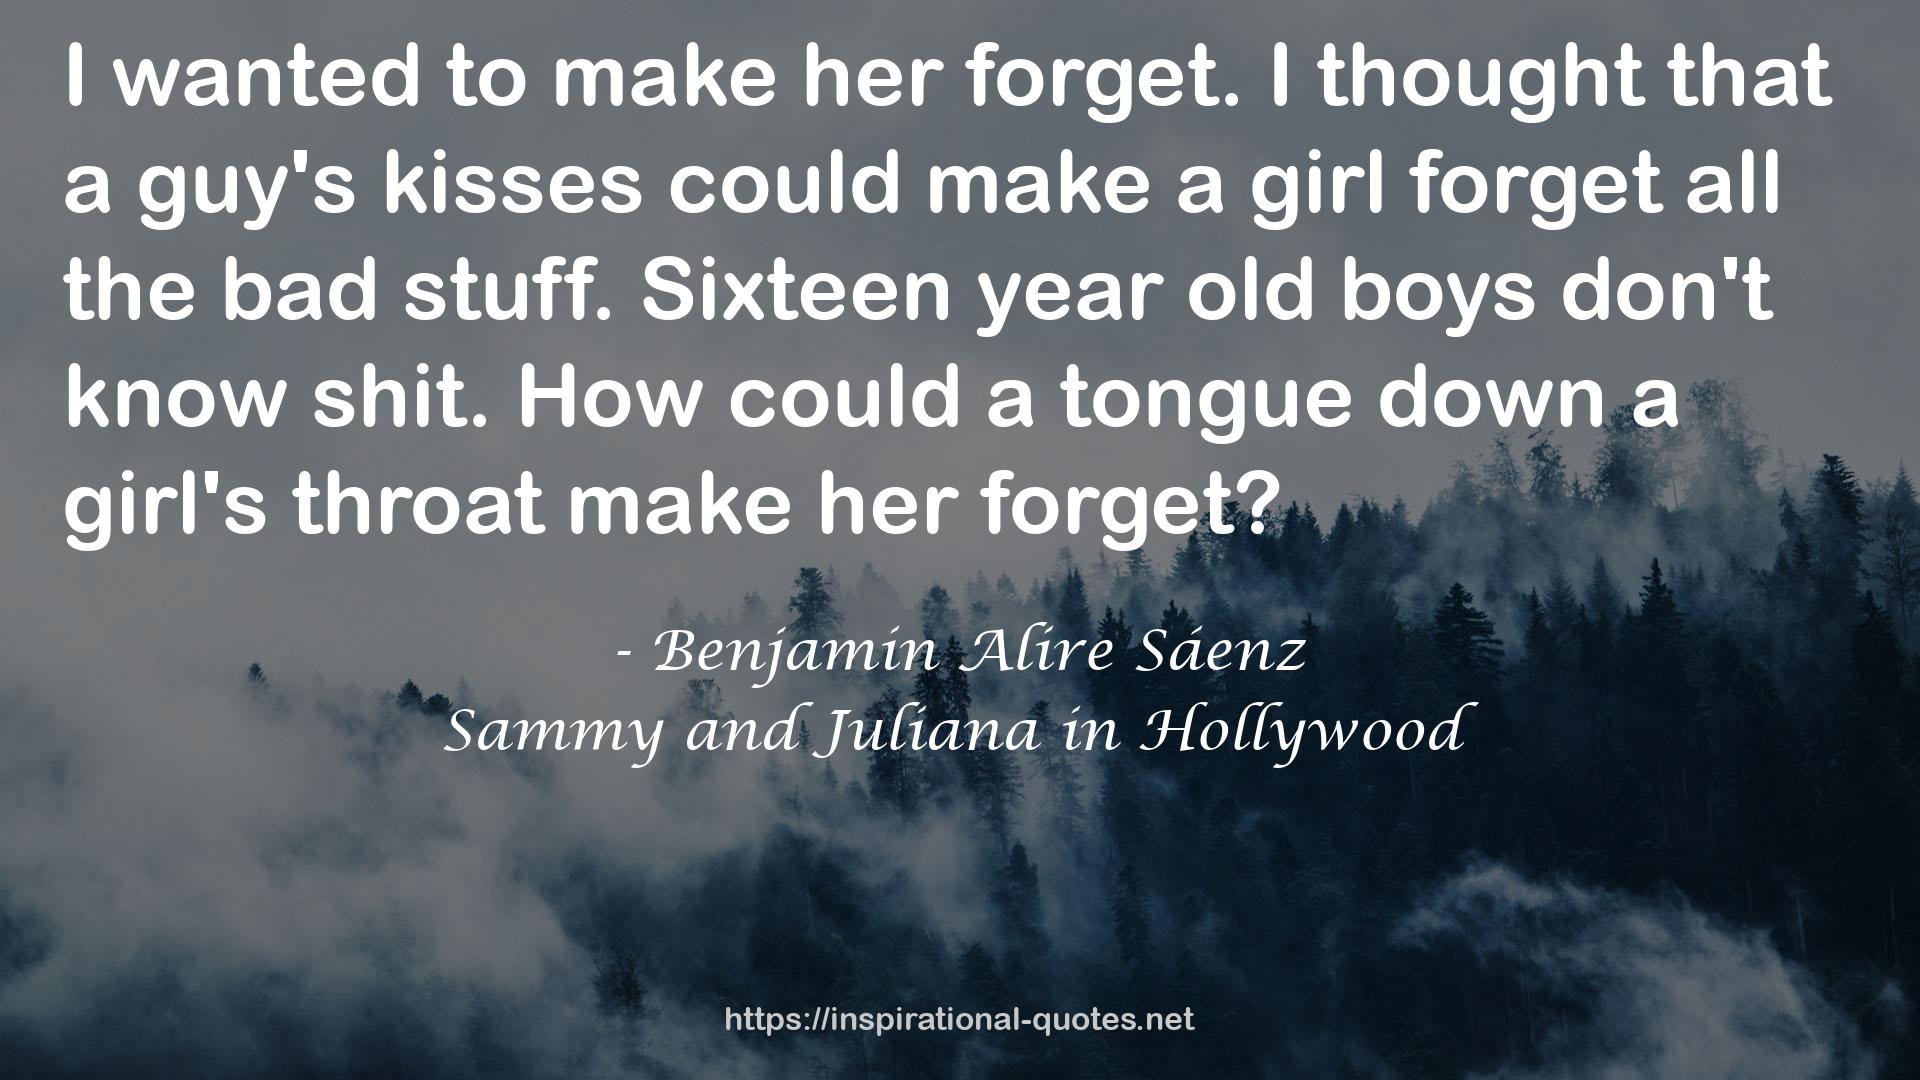 Sammy and Juliana in Hollywood QUOTES